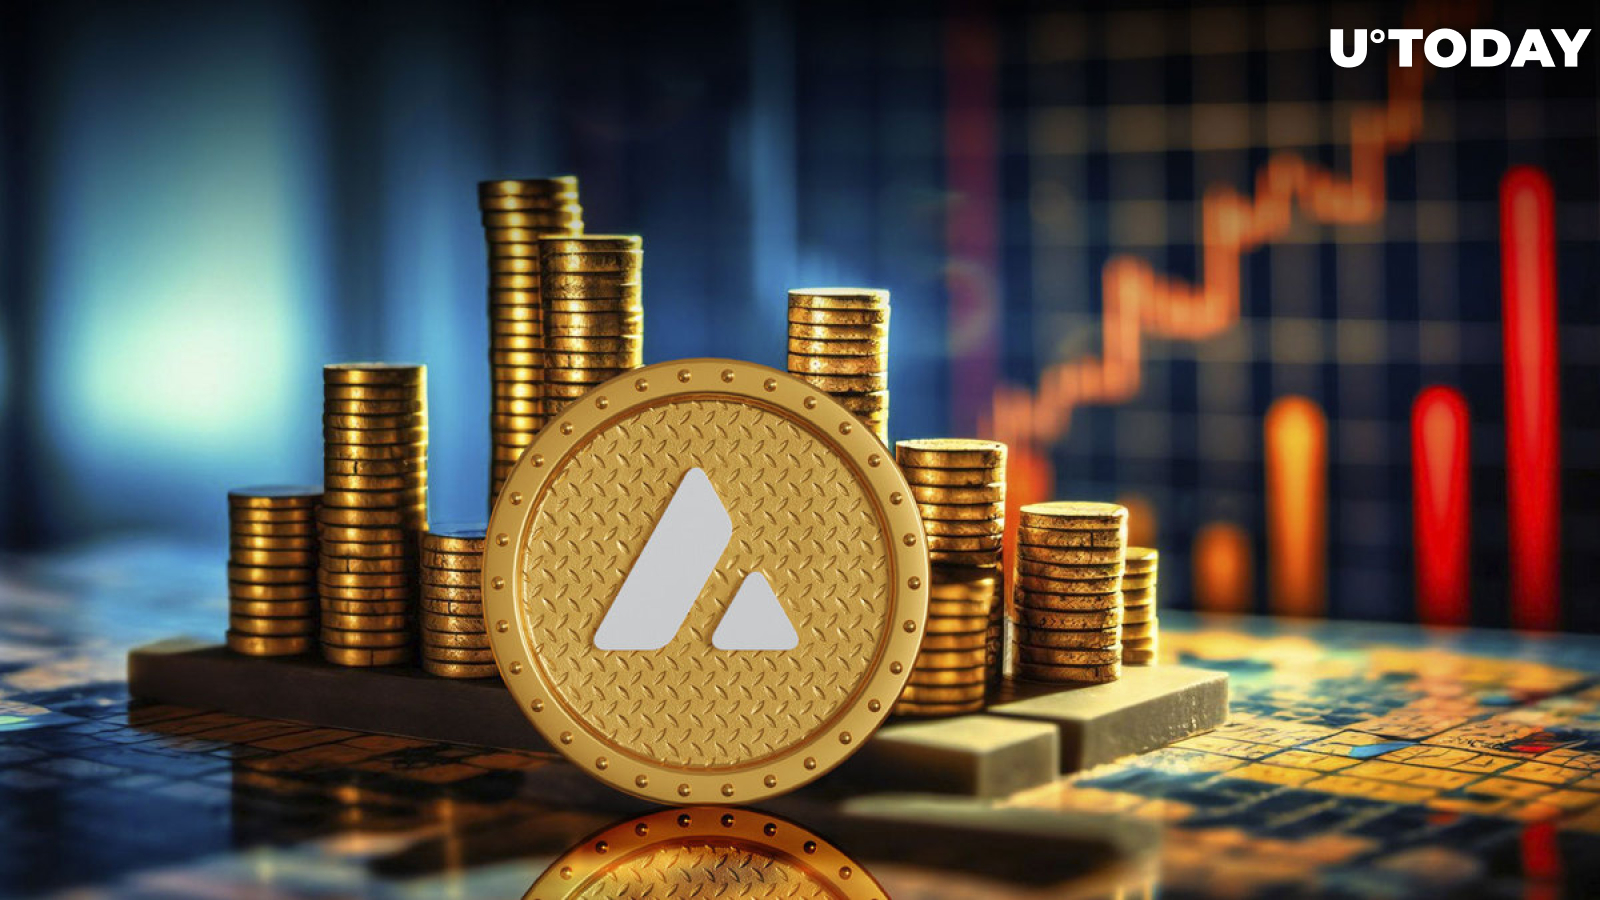 Avalanche (AVAX) Price Adds 400% in Two Months: Details